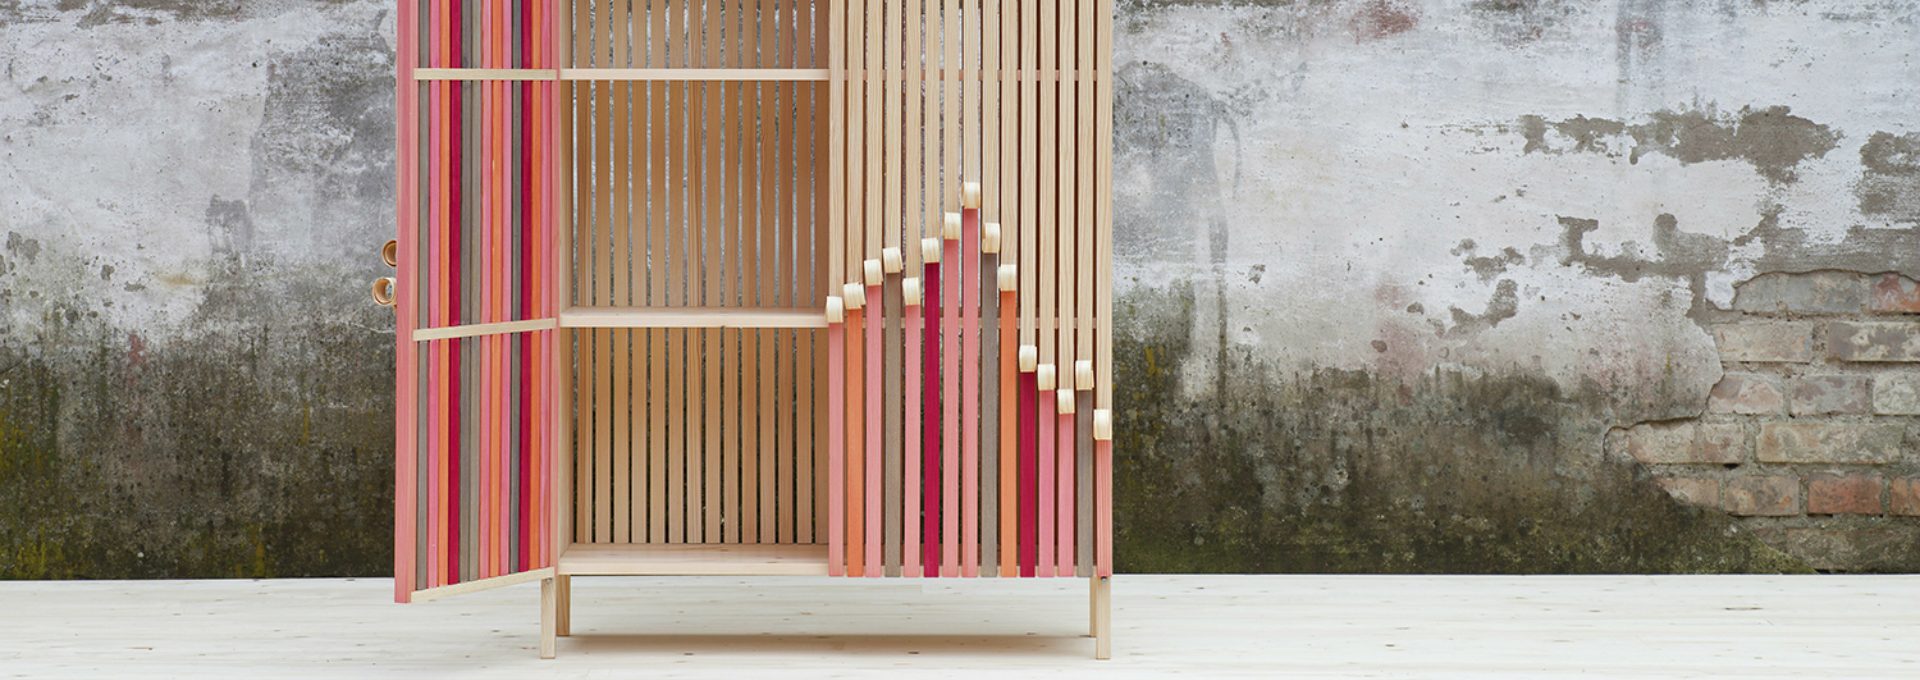 Dutch Design Week 2017 - Stoft's Wooden Cabinets Peel Away Over Time - What’s your DNA? exhibition - Stoft's Whittle Away cabinets - Stoft Studio ➤ Discover the season's newest design news and inspiration ideas. Visit Daily Design News and subscribe our newsletter! #dailydesignnews #designnews #DutchDesignWeek2017 #DutchDesignWeek #DDW2017 #StoftStudio